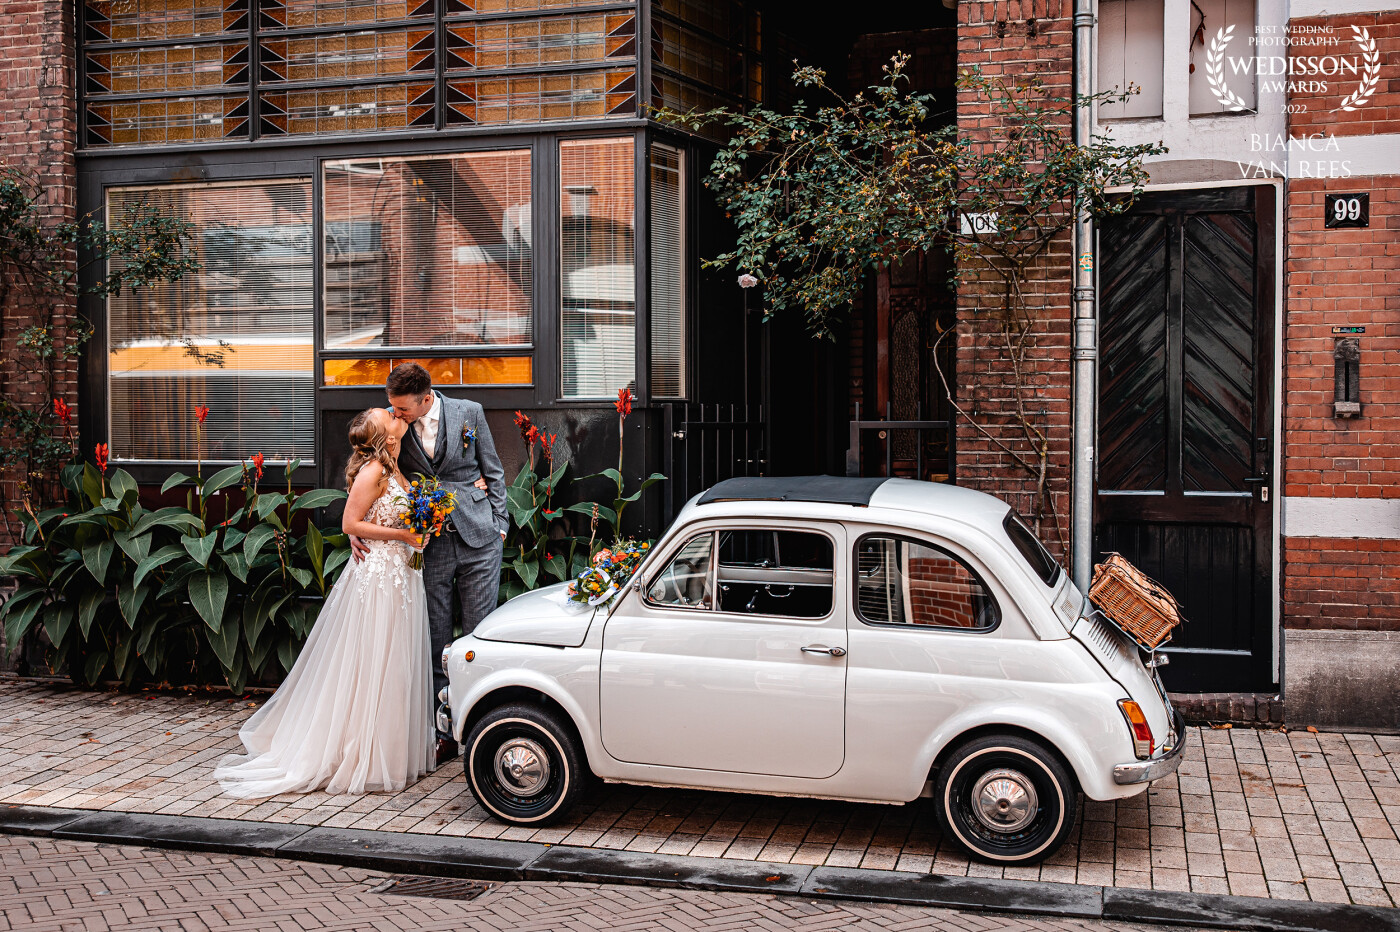 The old city centre of Tilburg is very charming and pretty, and it was the perfect choice for the wedding shoot for J&A. As wedding car they had this old cute little fiat 500 oldtimer, which was all dressed up with flowers and a basket. It was a perfect match with the old buildings, and I had nothing left to do than to captur this beautiful scene.